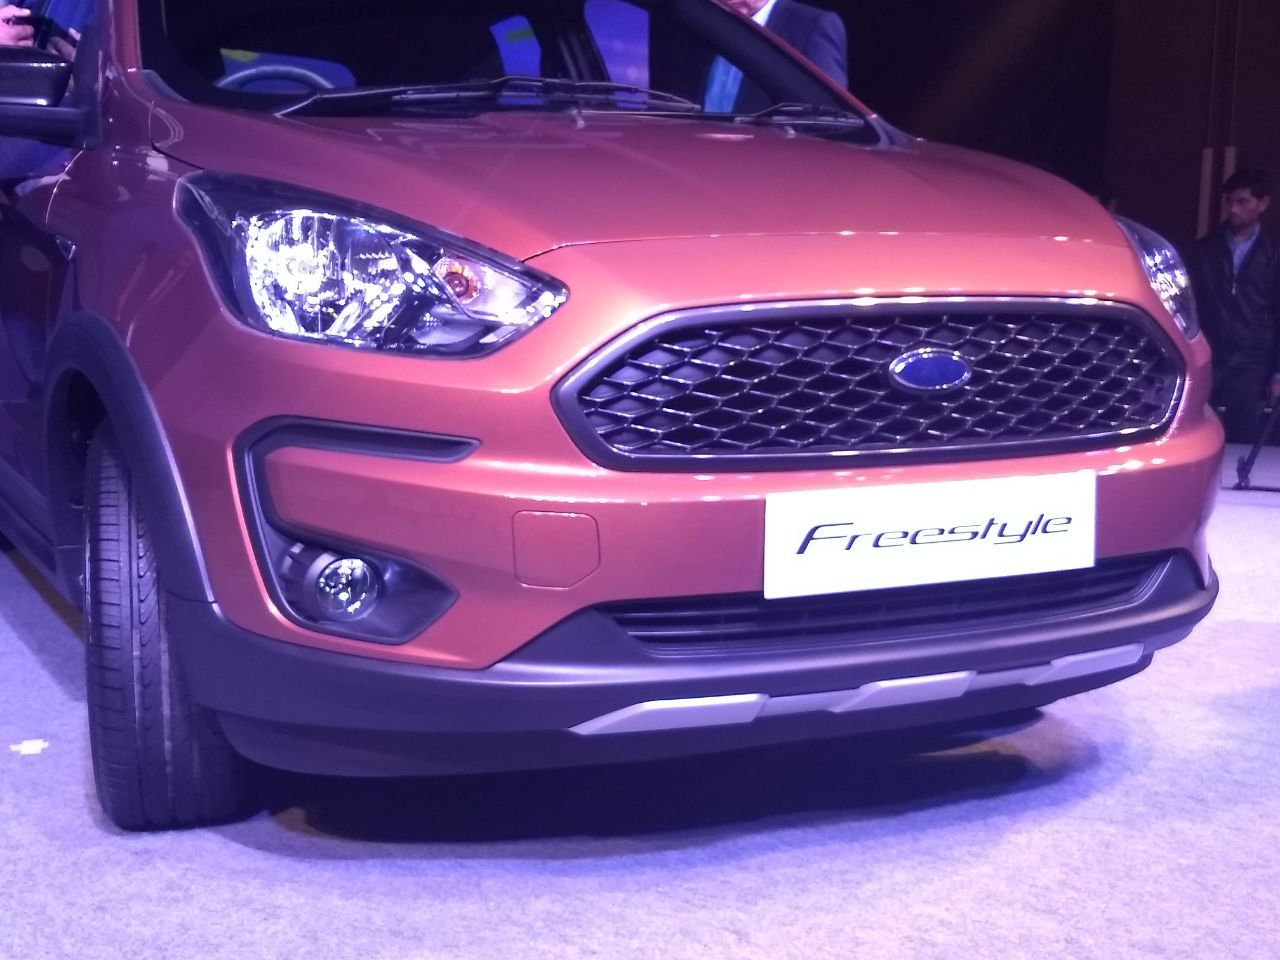 Ford Freestyle Unveil Highlights Images, Specifications, Features